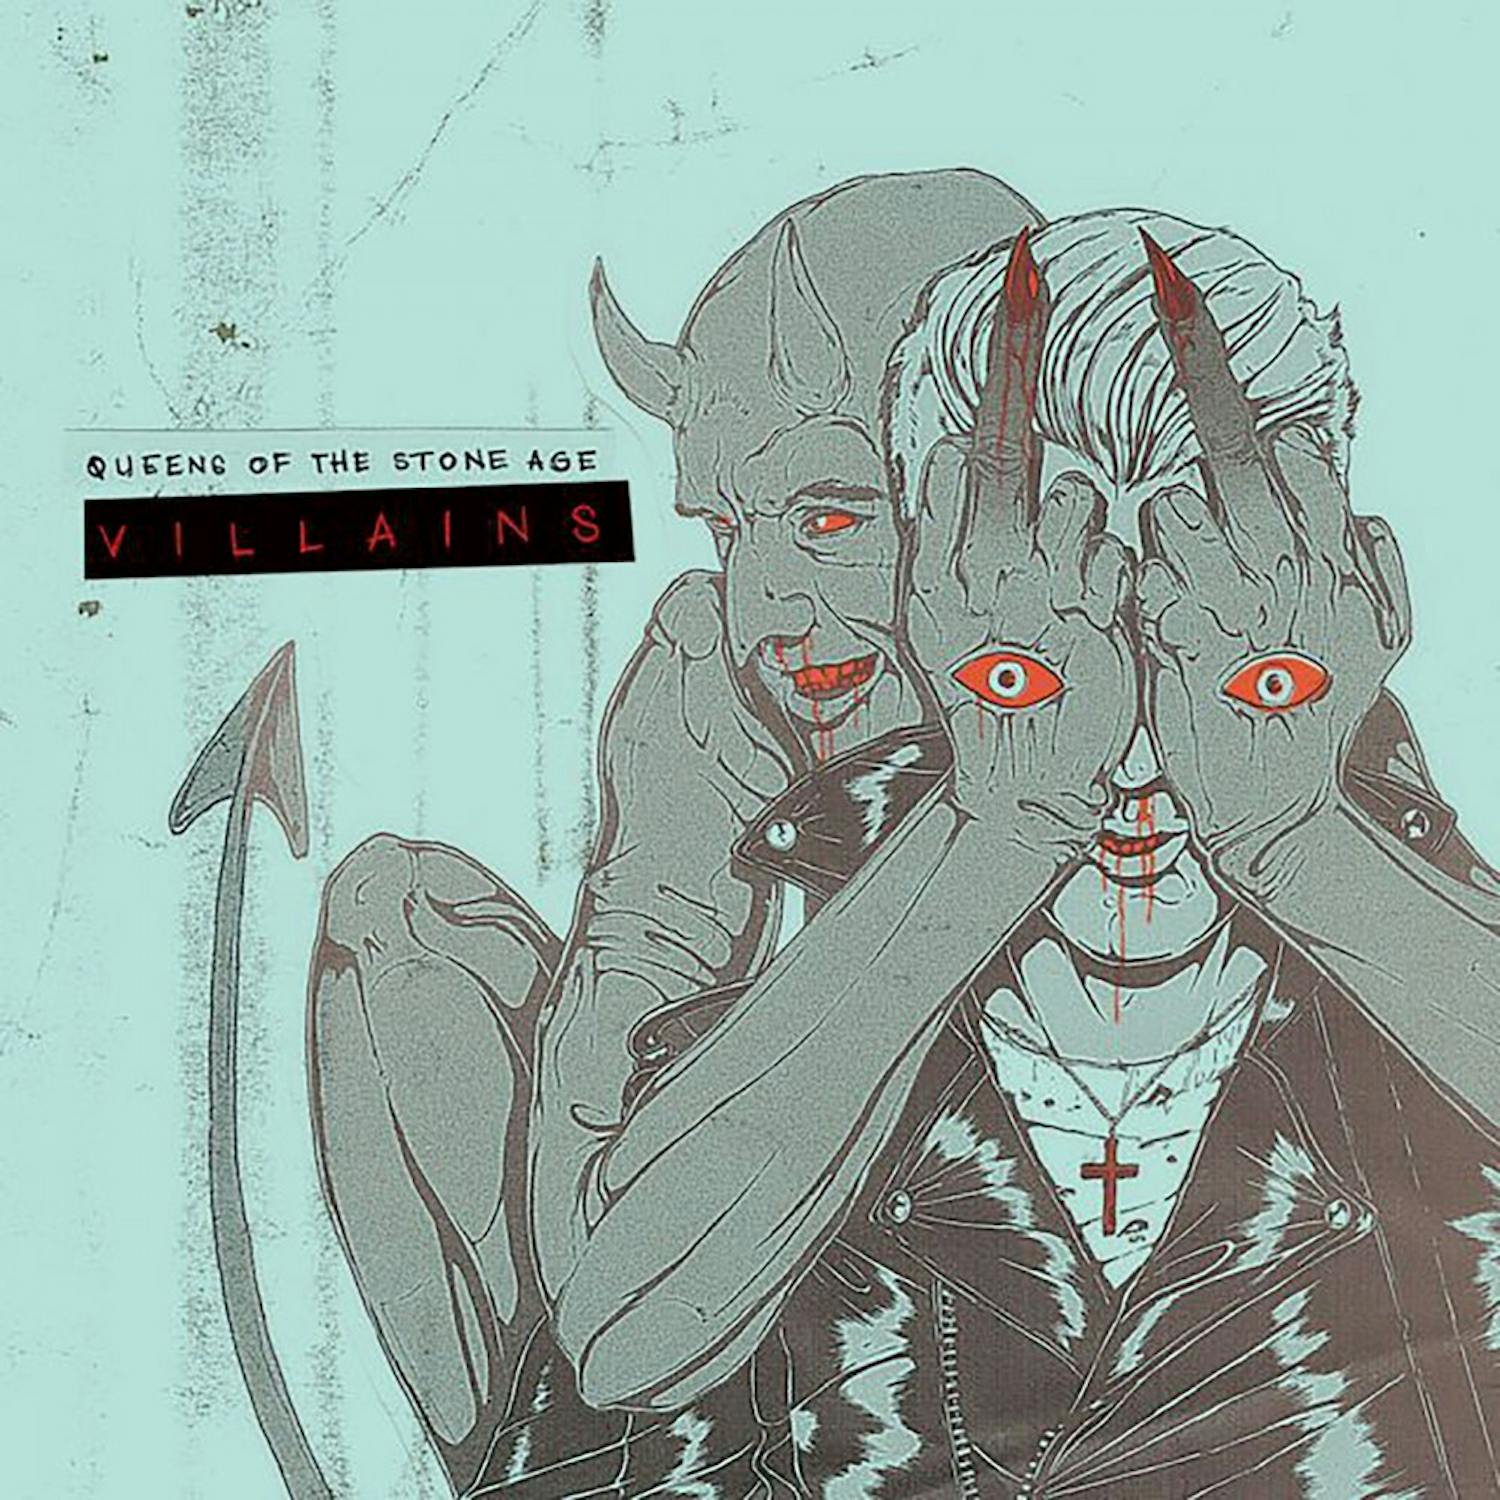 On Villains, Queens of the Stone Age push a more commercial sound yet still delight. The band collaborate with pop producer Mark Ronson on the LP, creating a music-verse full of entertaining and liberating tracks.